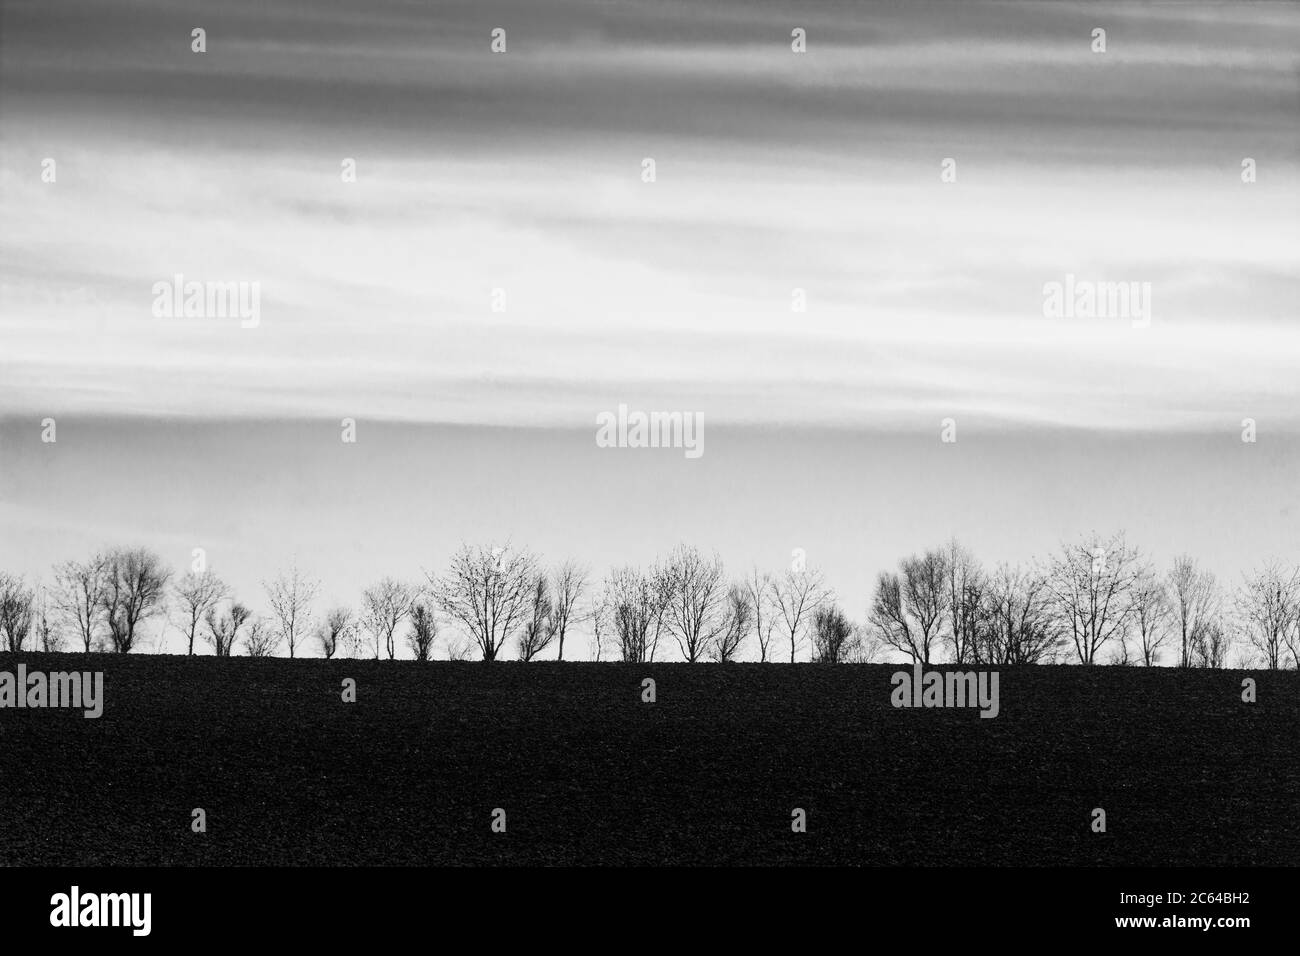 Trees in a row in a agricultural field. Auvergne. France Stock Photo